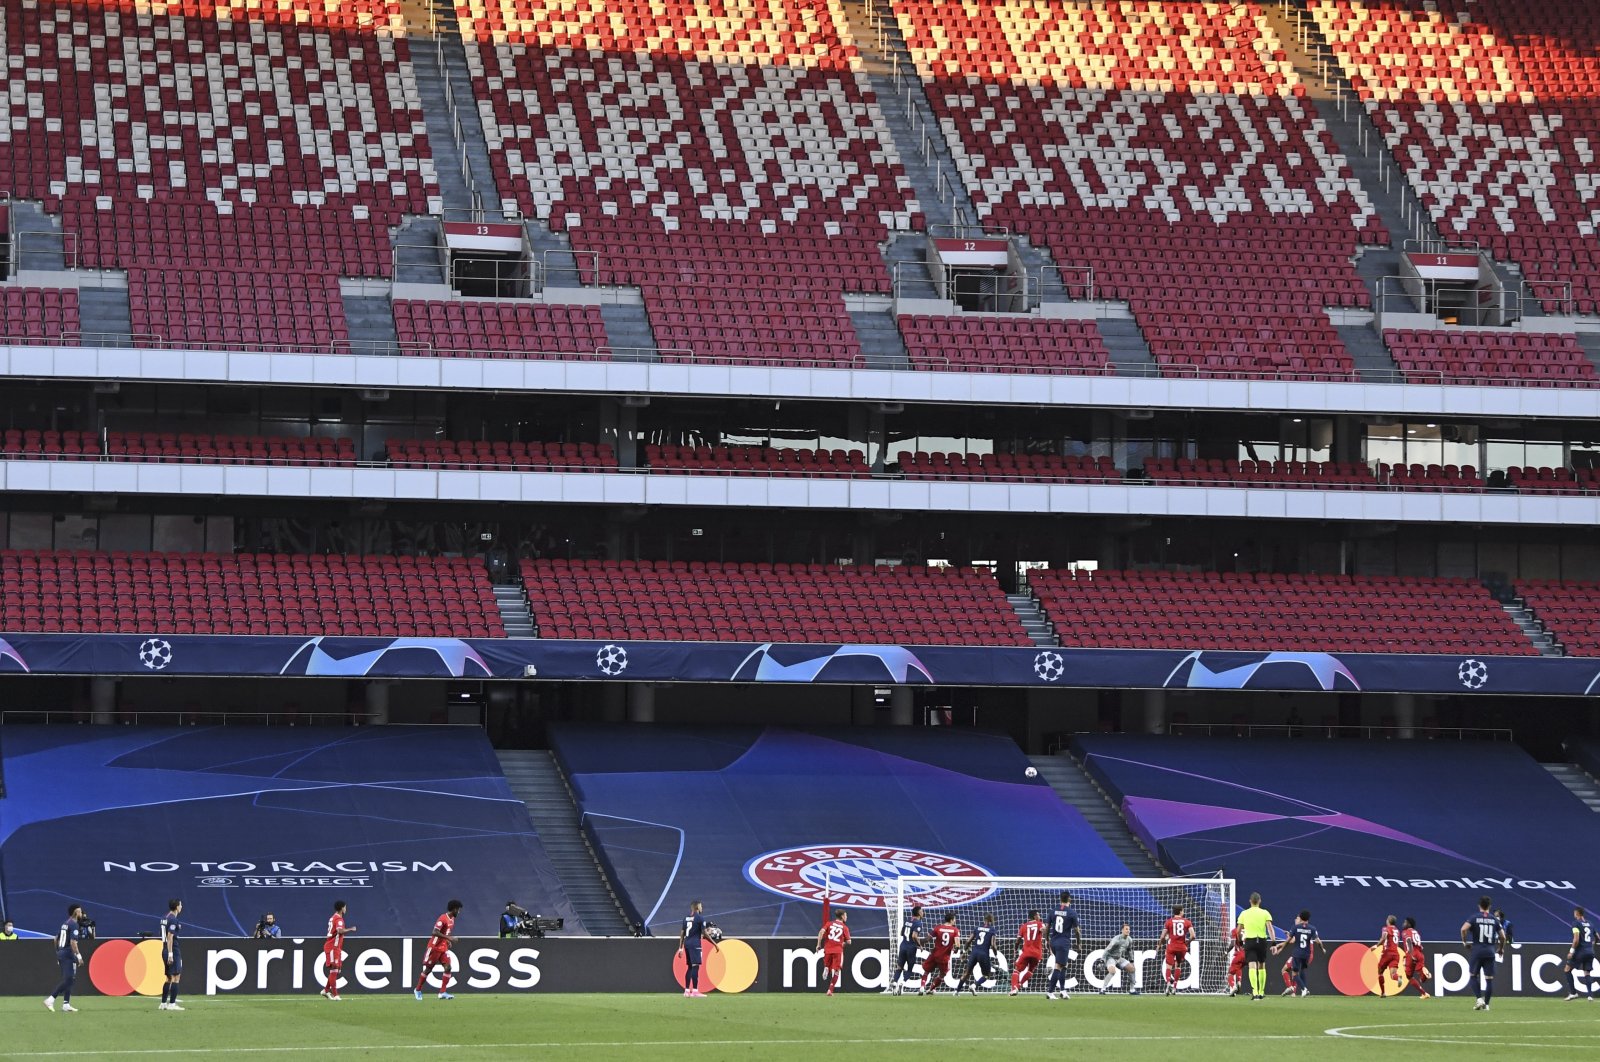 Players challenge for the ball in front of empty stands during the Champions League final match between Paris Saint-Germain and Bayern Munich in Lisbon, Portugal, Aug. 23, 2020. (AP Photo)